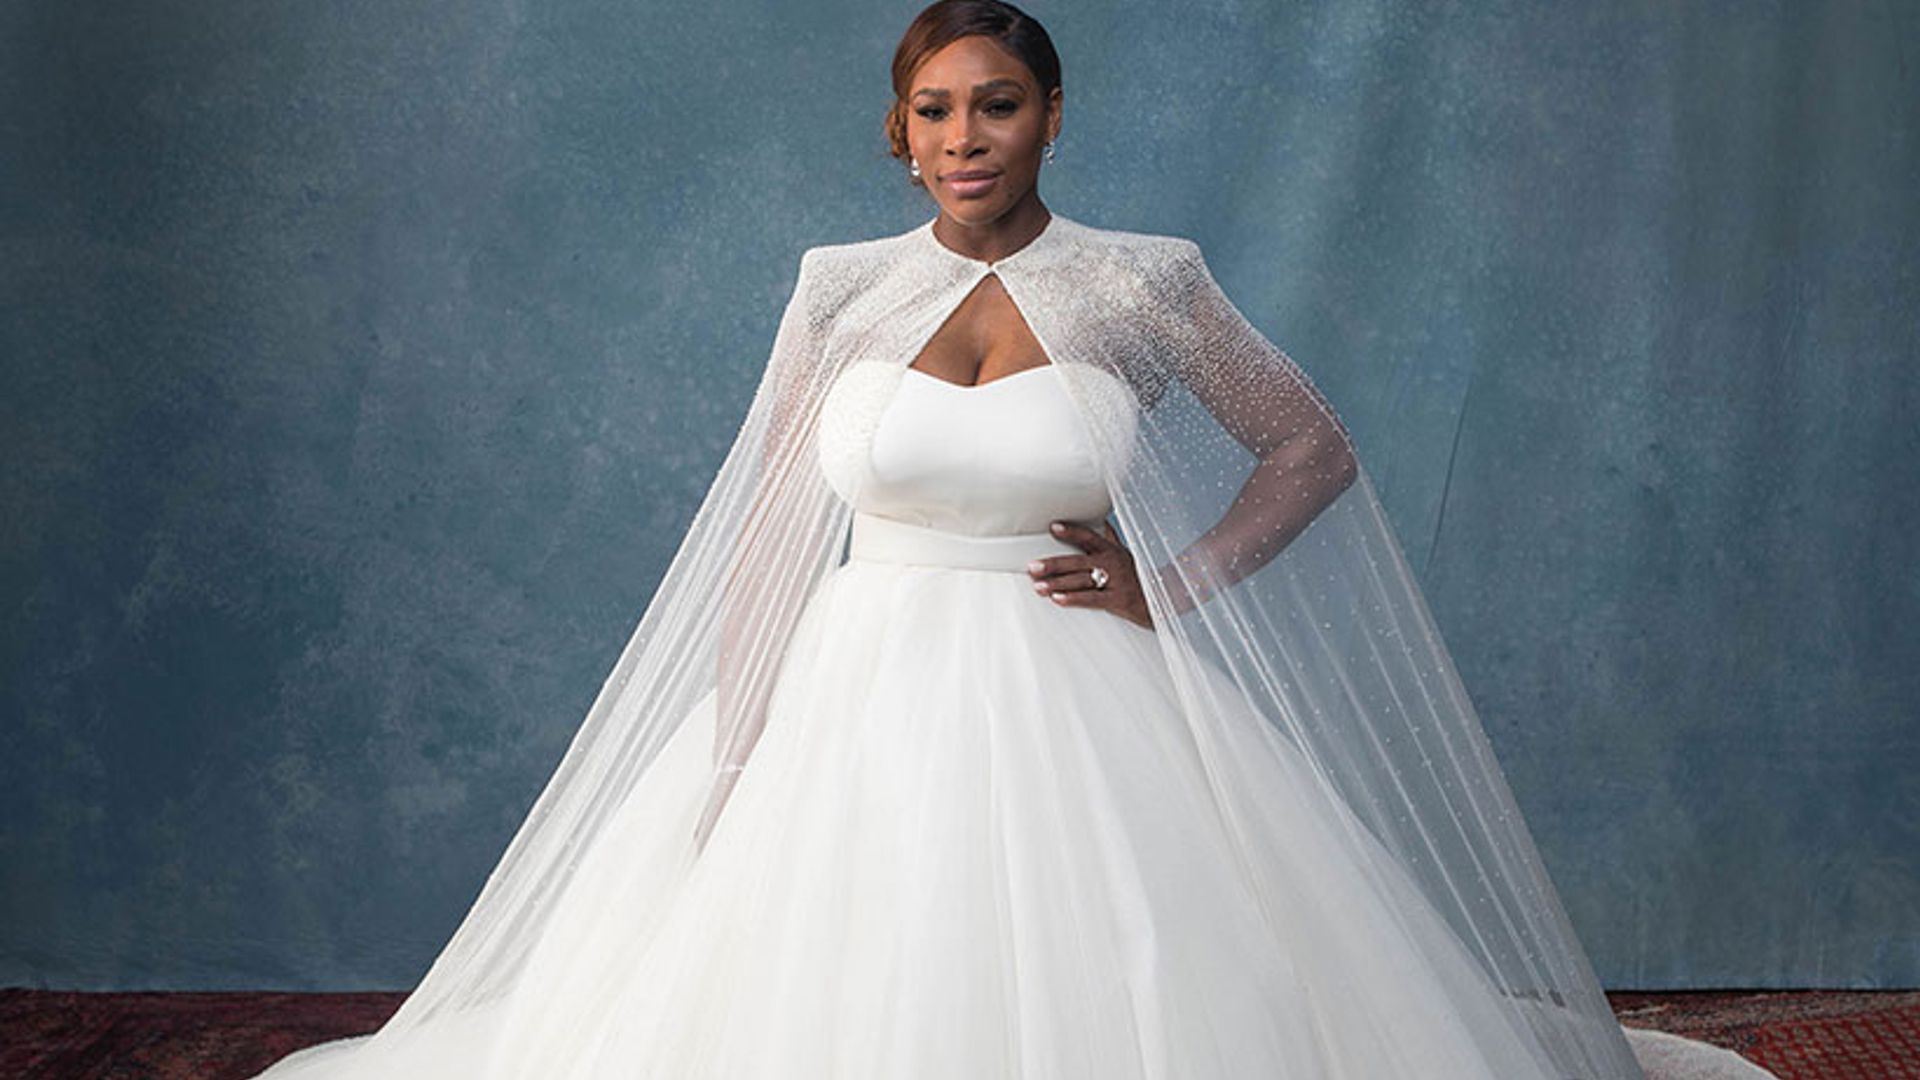 Serena Williams' Wedding Dress Was Fit for a Superwoman - The Wedding Scoop